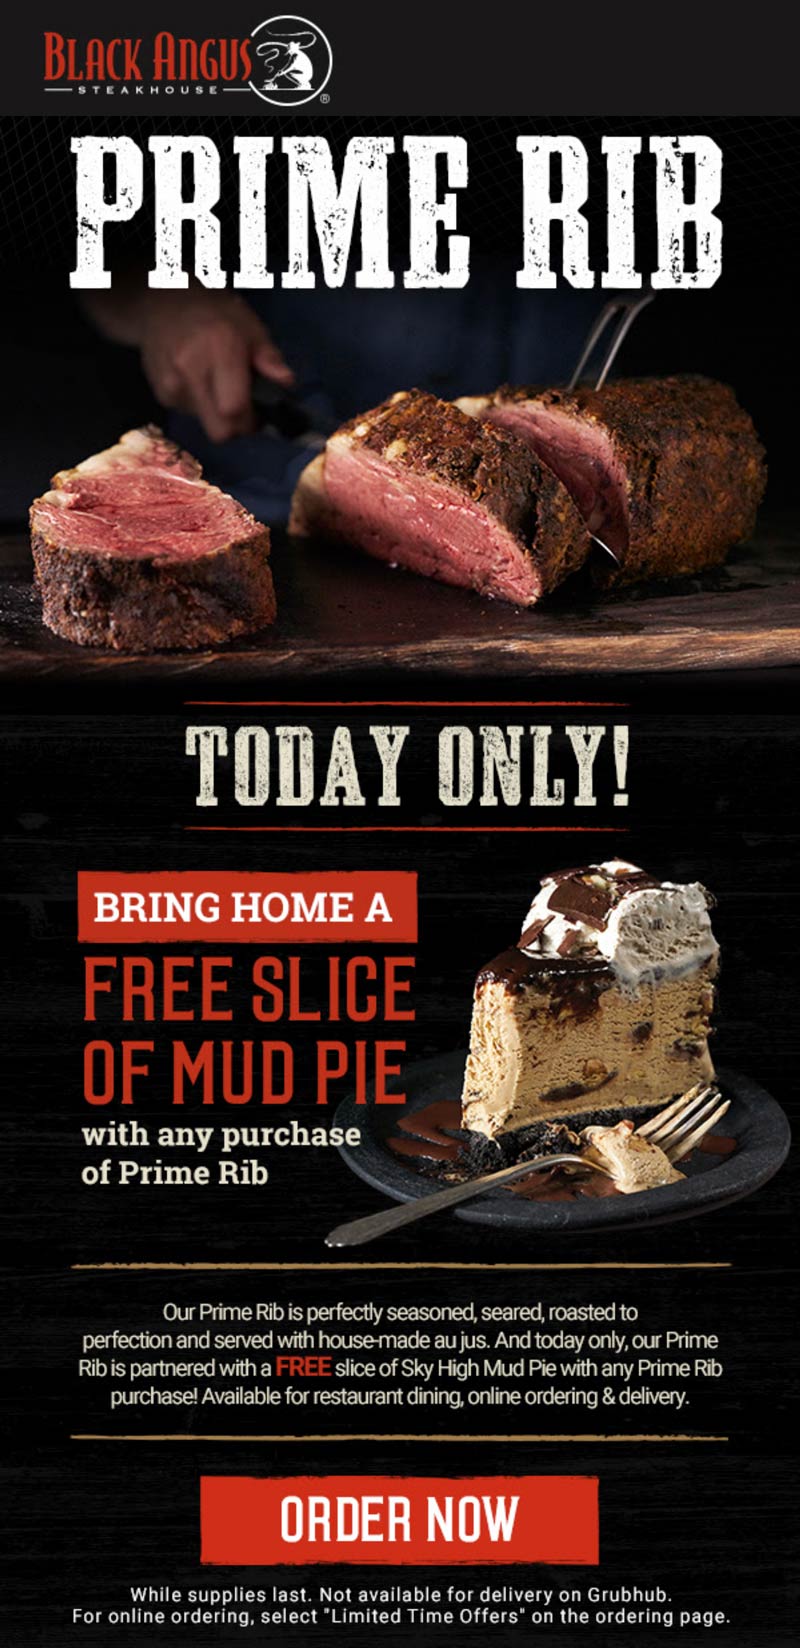 Black Angus restaurants Coupon  Free mud pie with your prime rib today at Black Angus steakhouse #blackangus 